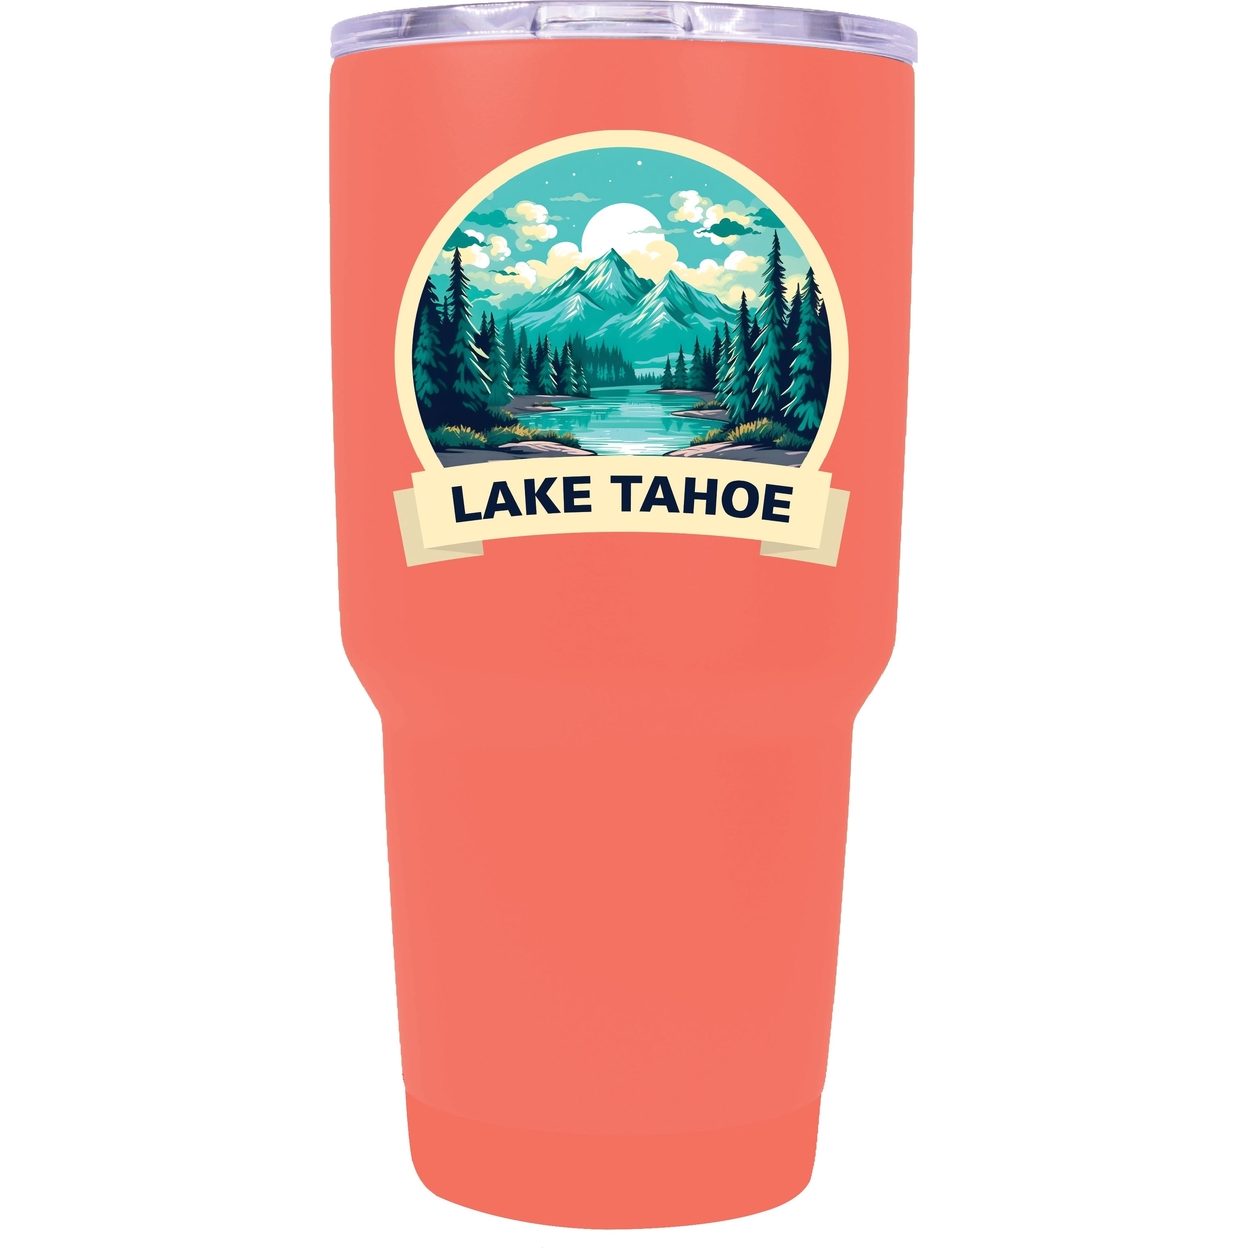 Lake Tahoe California Souvenir 24 Oz Insulated Stainless Steel Tumbler - Coral,,4-Pack